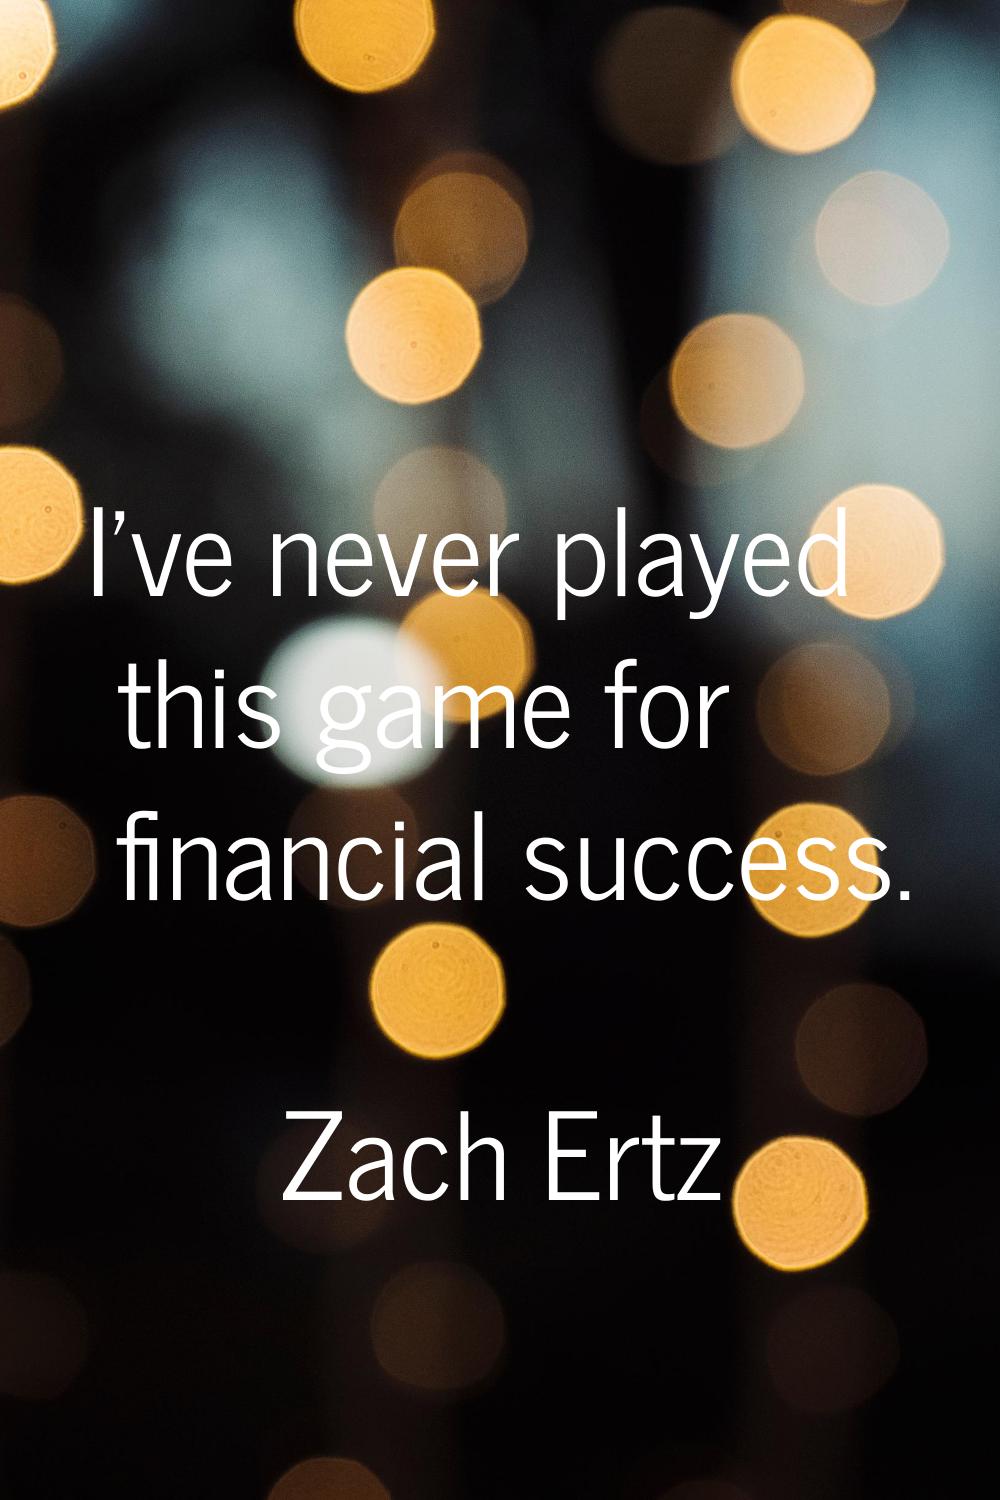 I've never played this game for financial success.